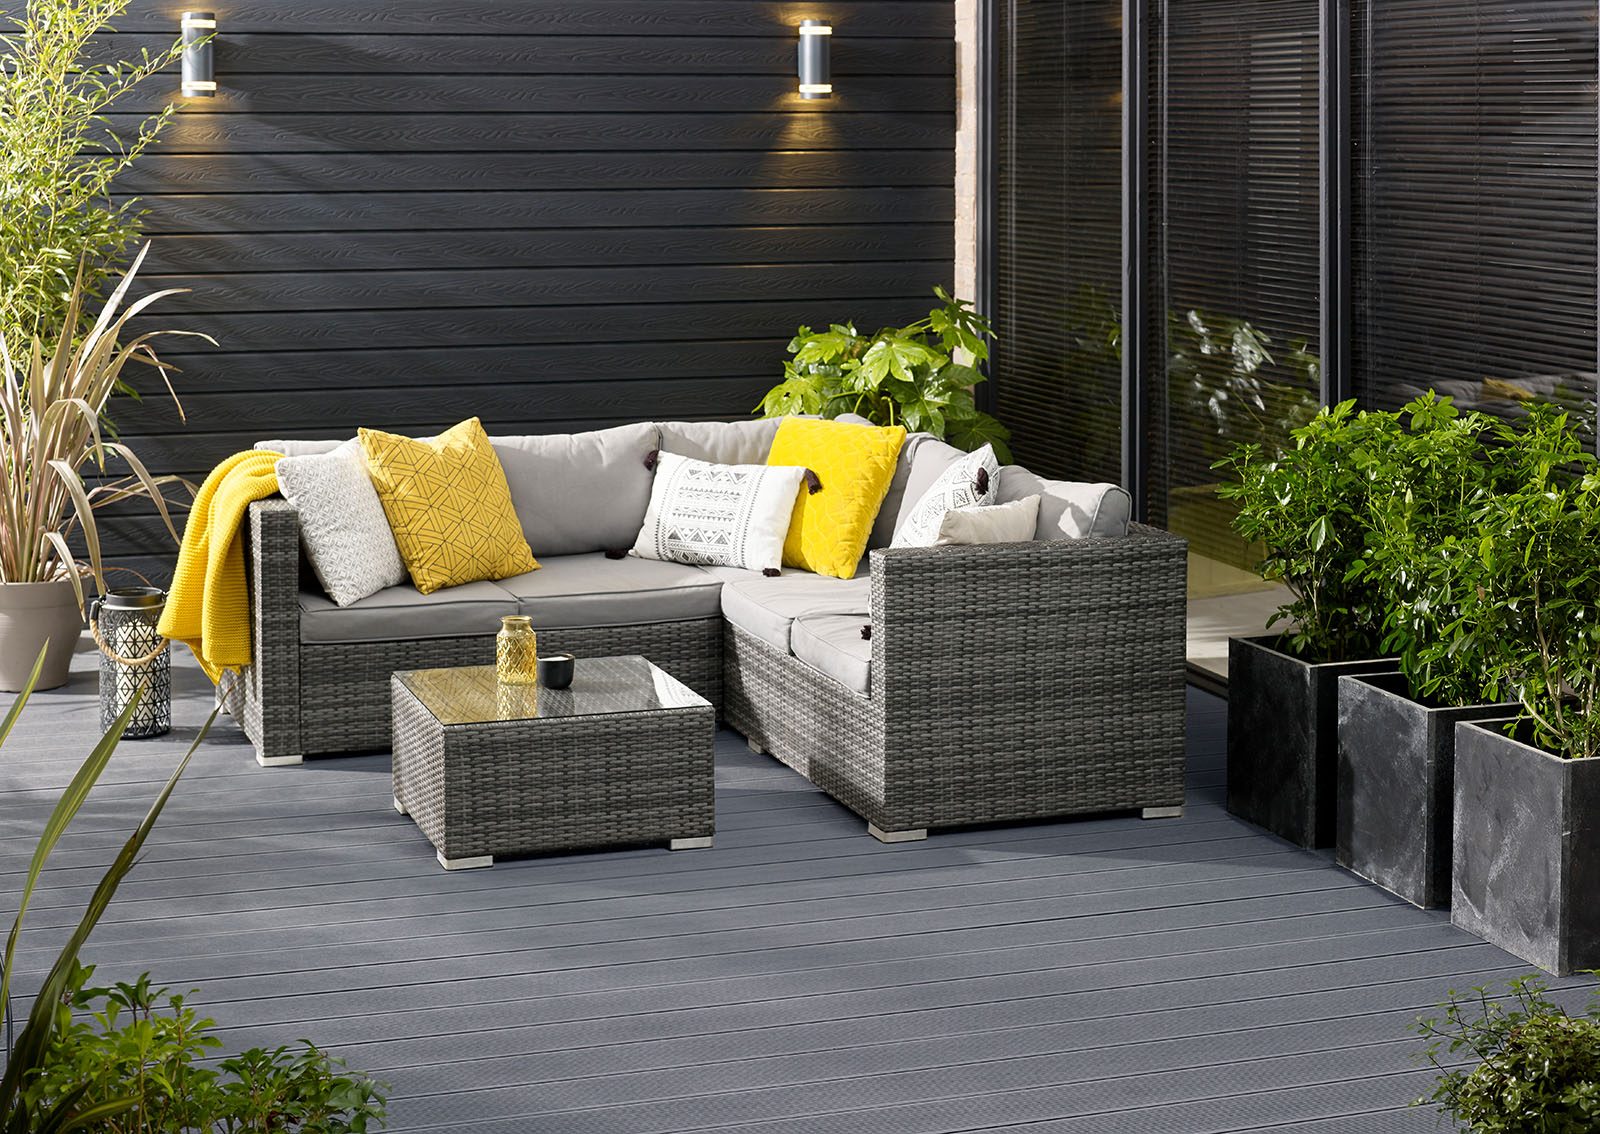 Husqui grey decking in courtyard with wicker corner sofa, plants and black clad exterior wall